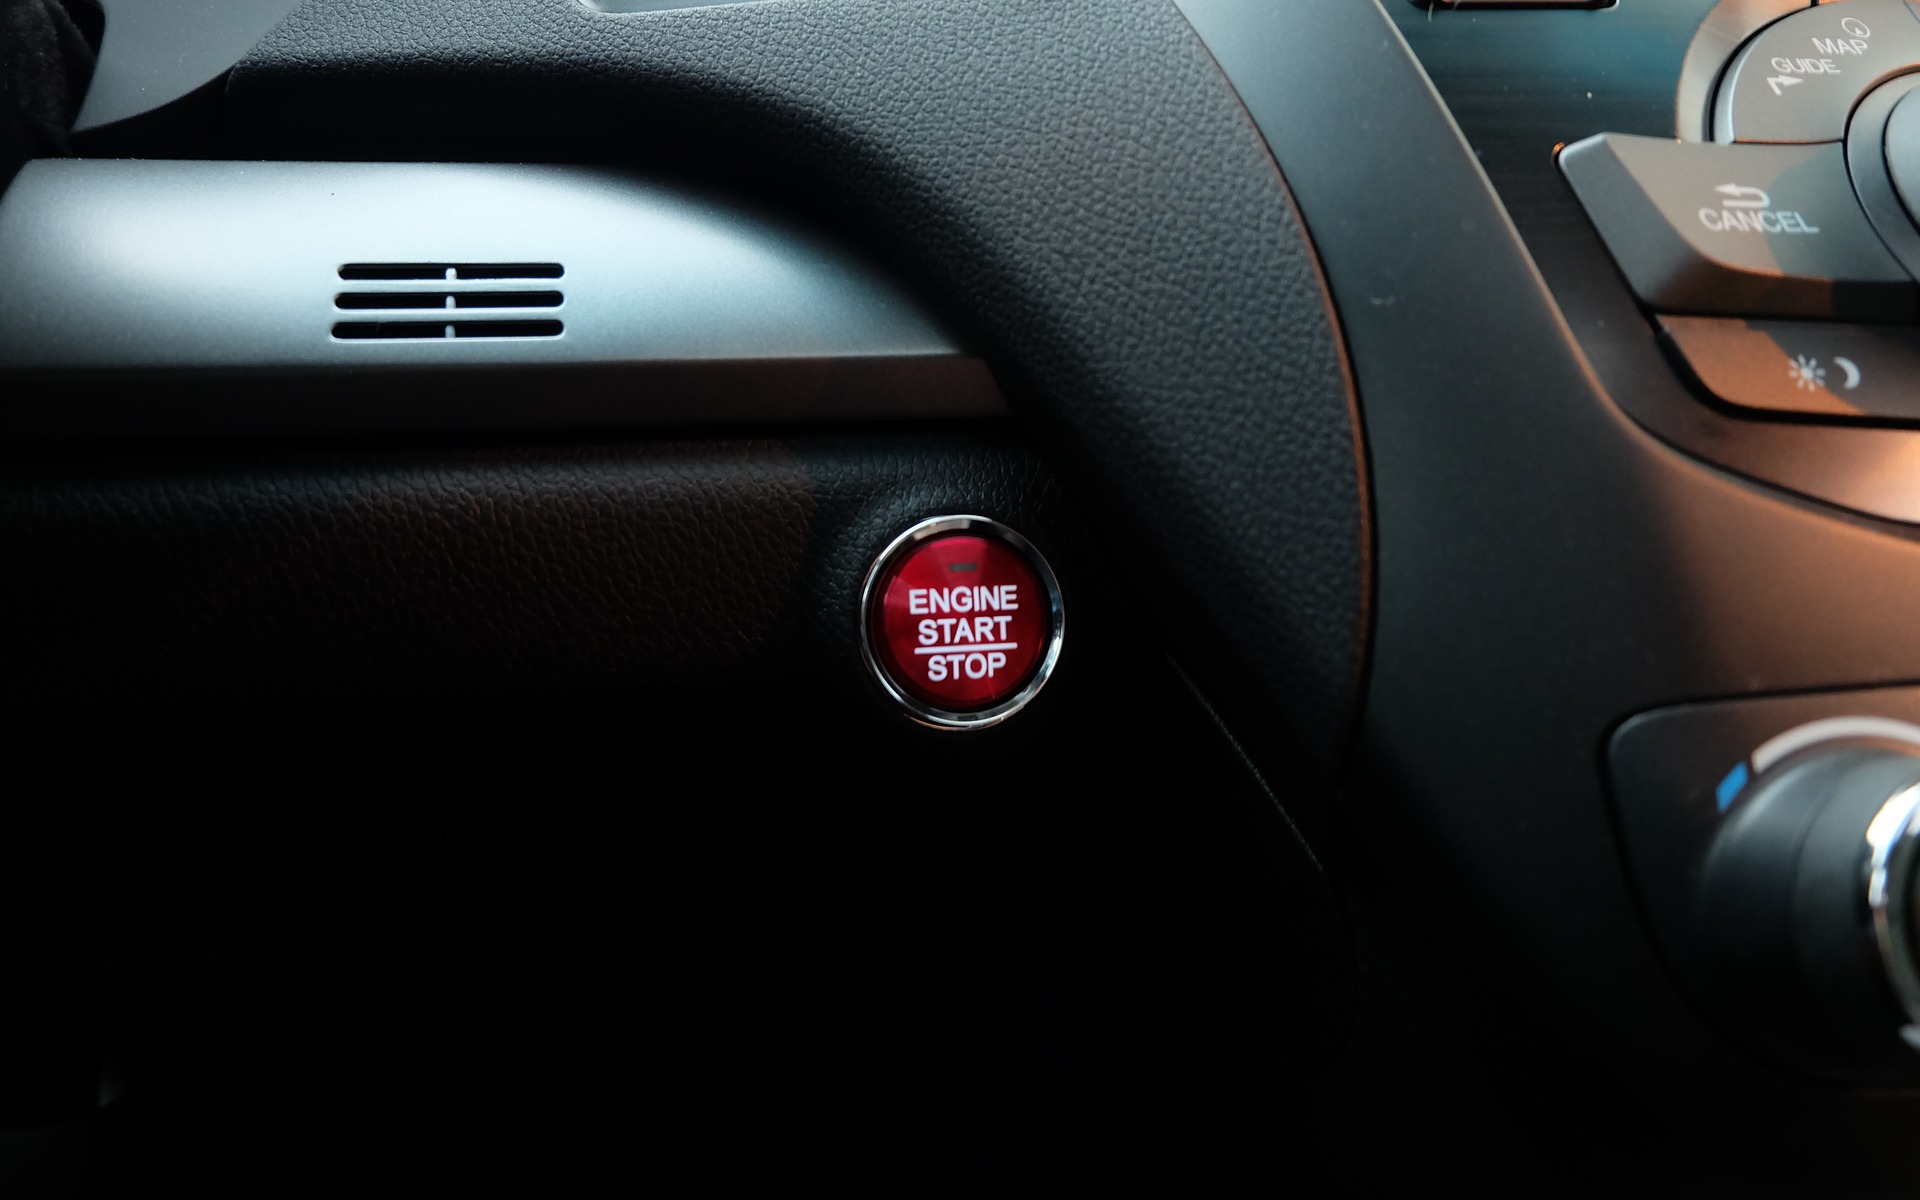 Honda's typical red button adds a bit of colour to the dashboard.